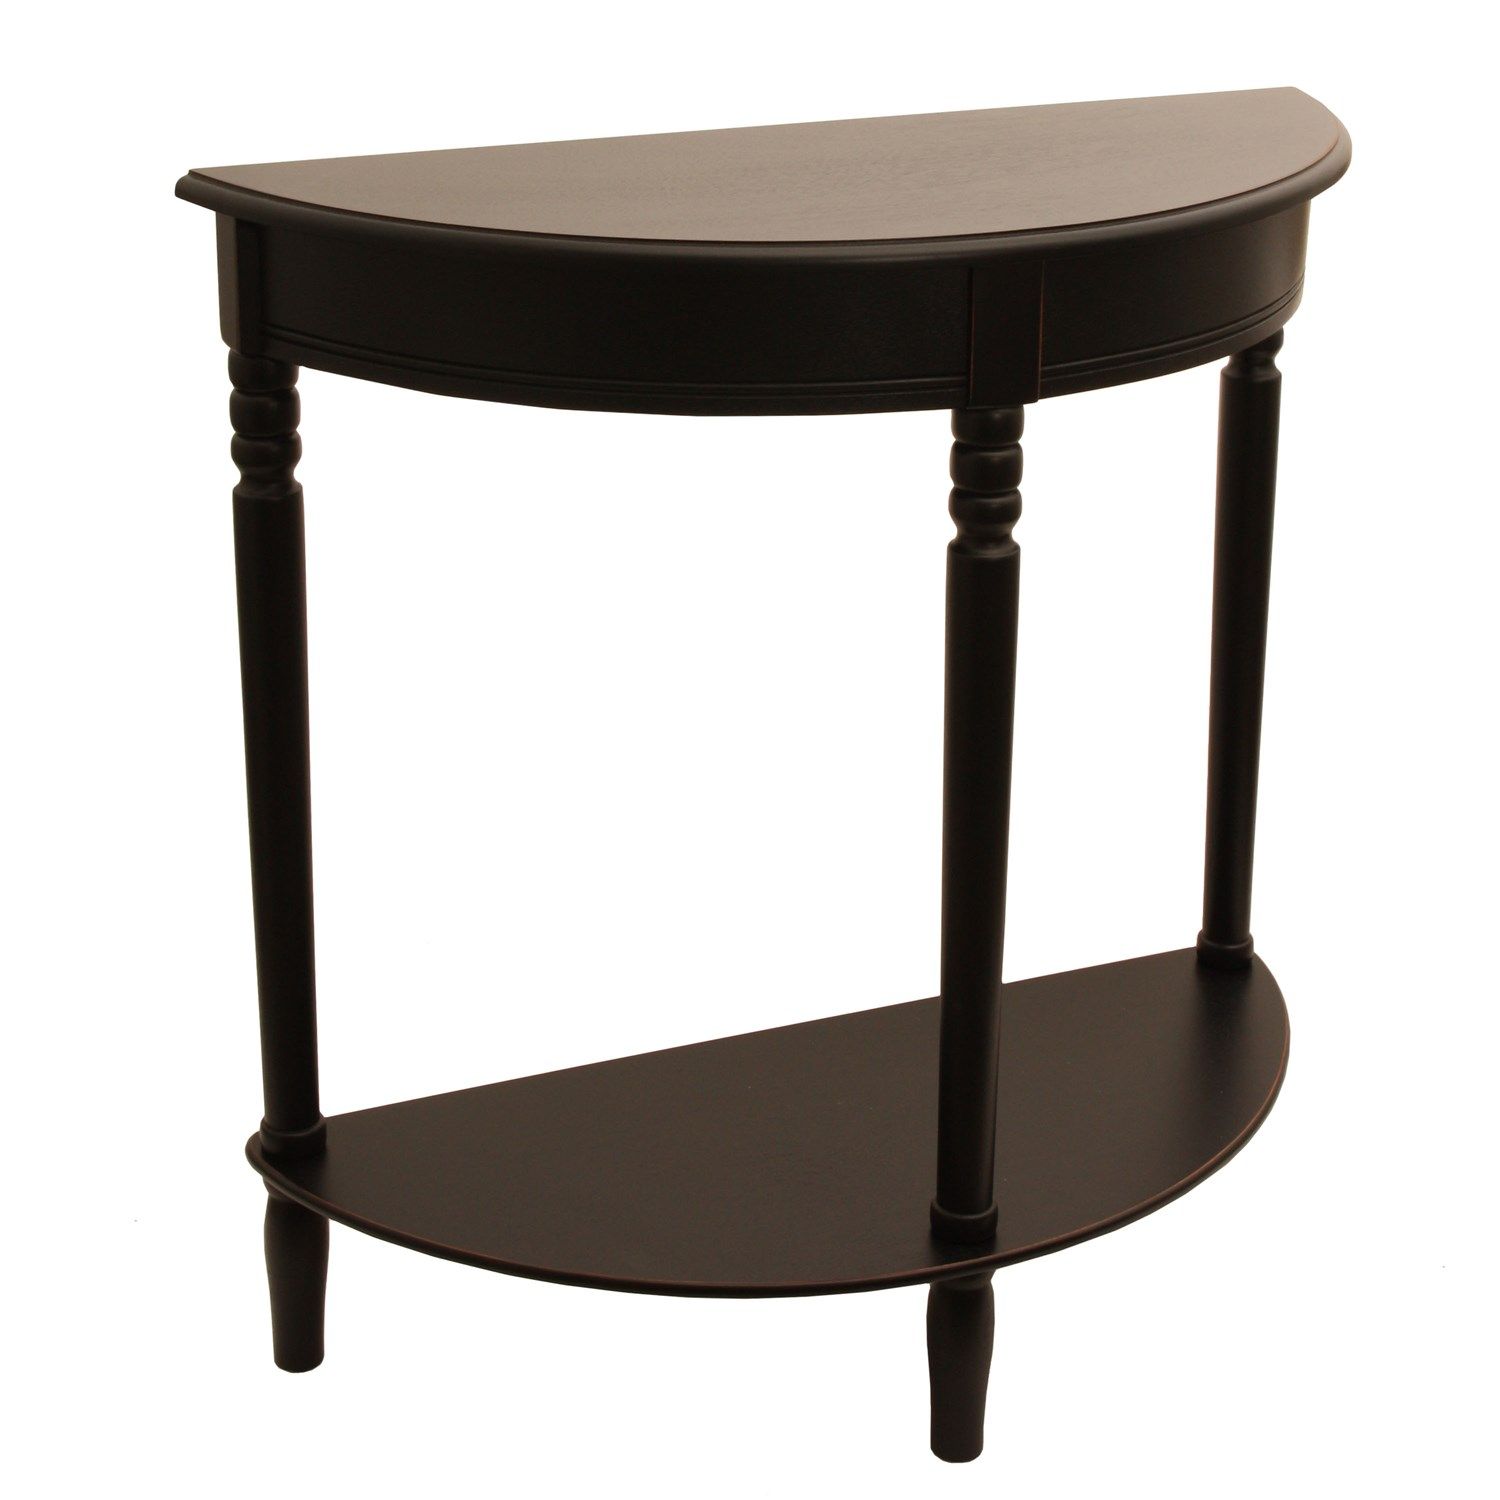 awesome half round accent table designer ideas bakers rack circle shabby chic lamps small space furniture solutions beech bedside kids lamp brass hairpin legs inch wide console